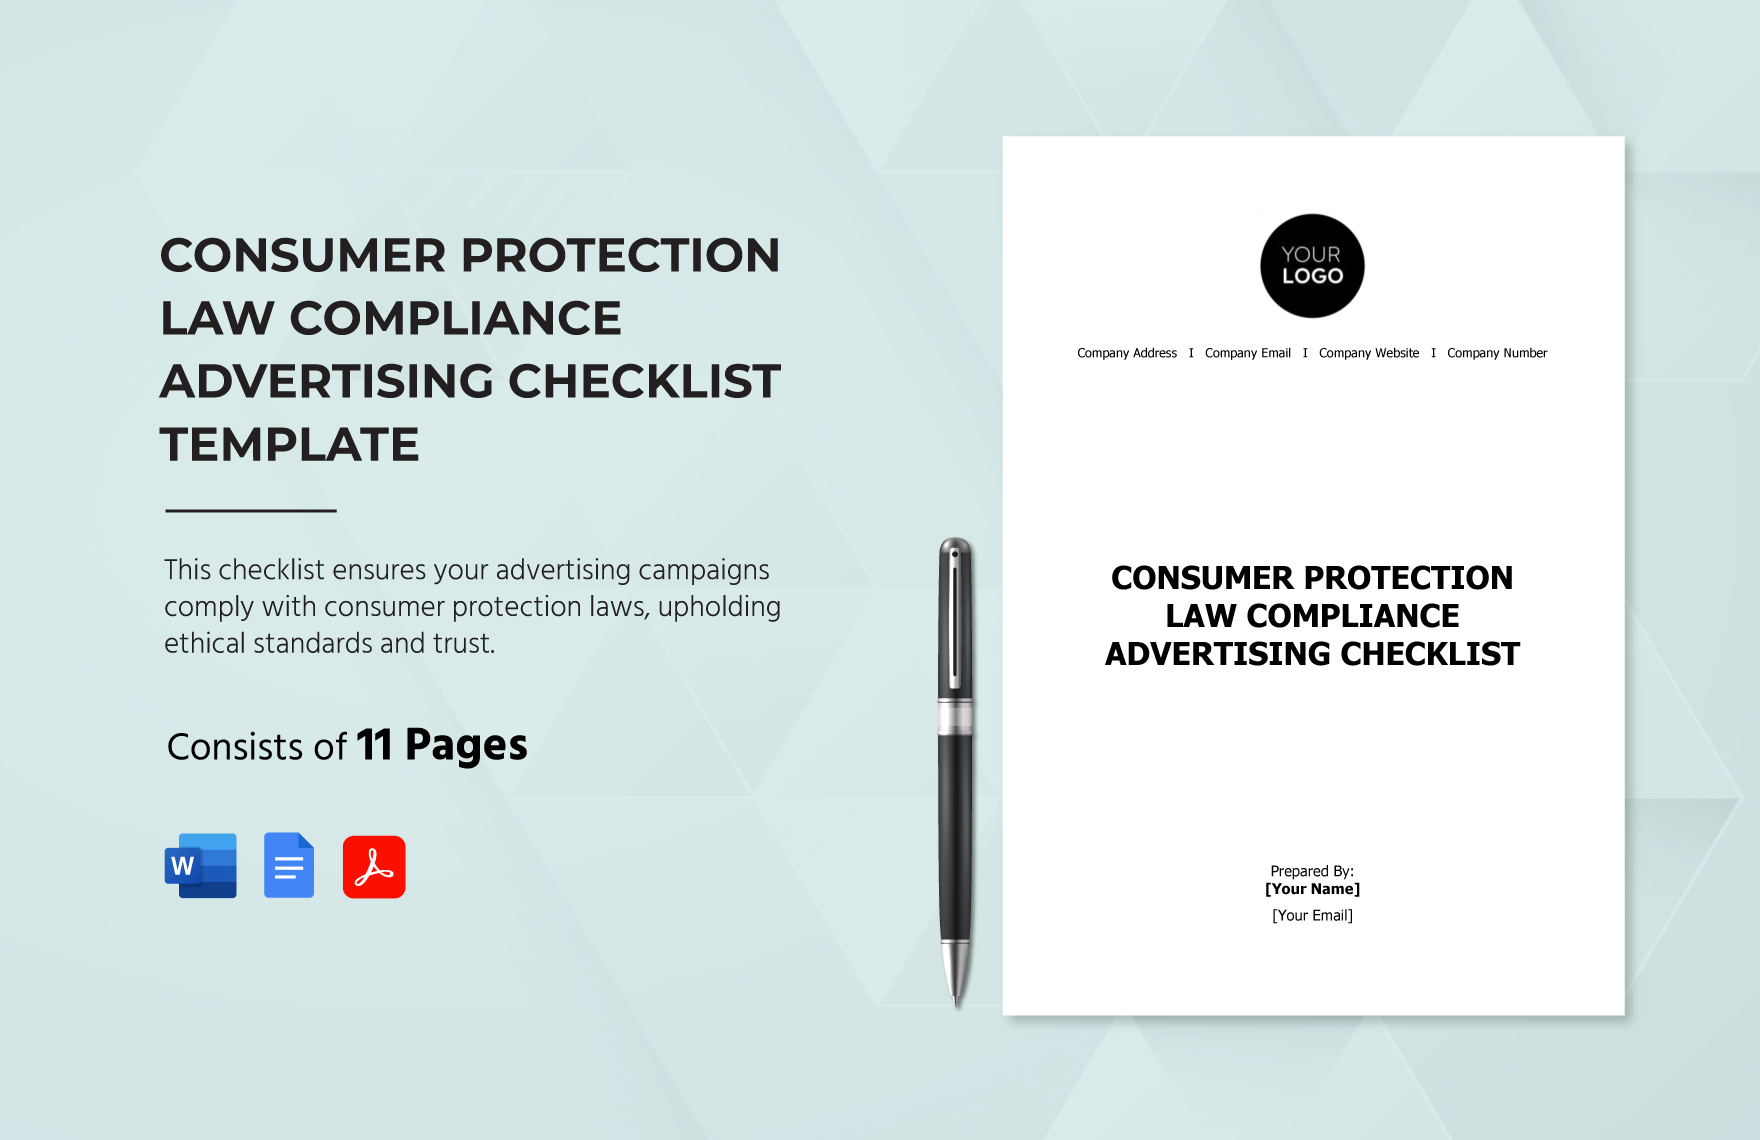 Consumer Protection Law Compliance Advertising Checklist Template